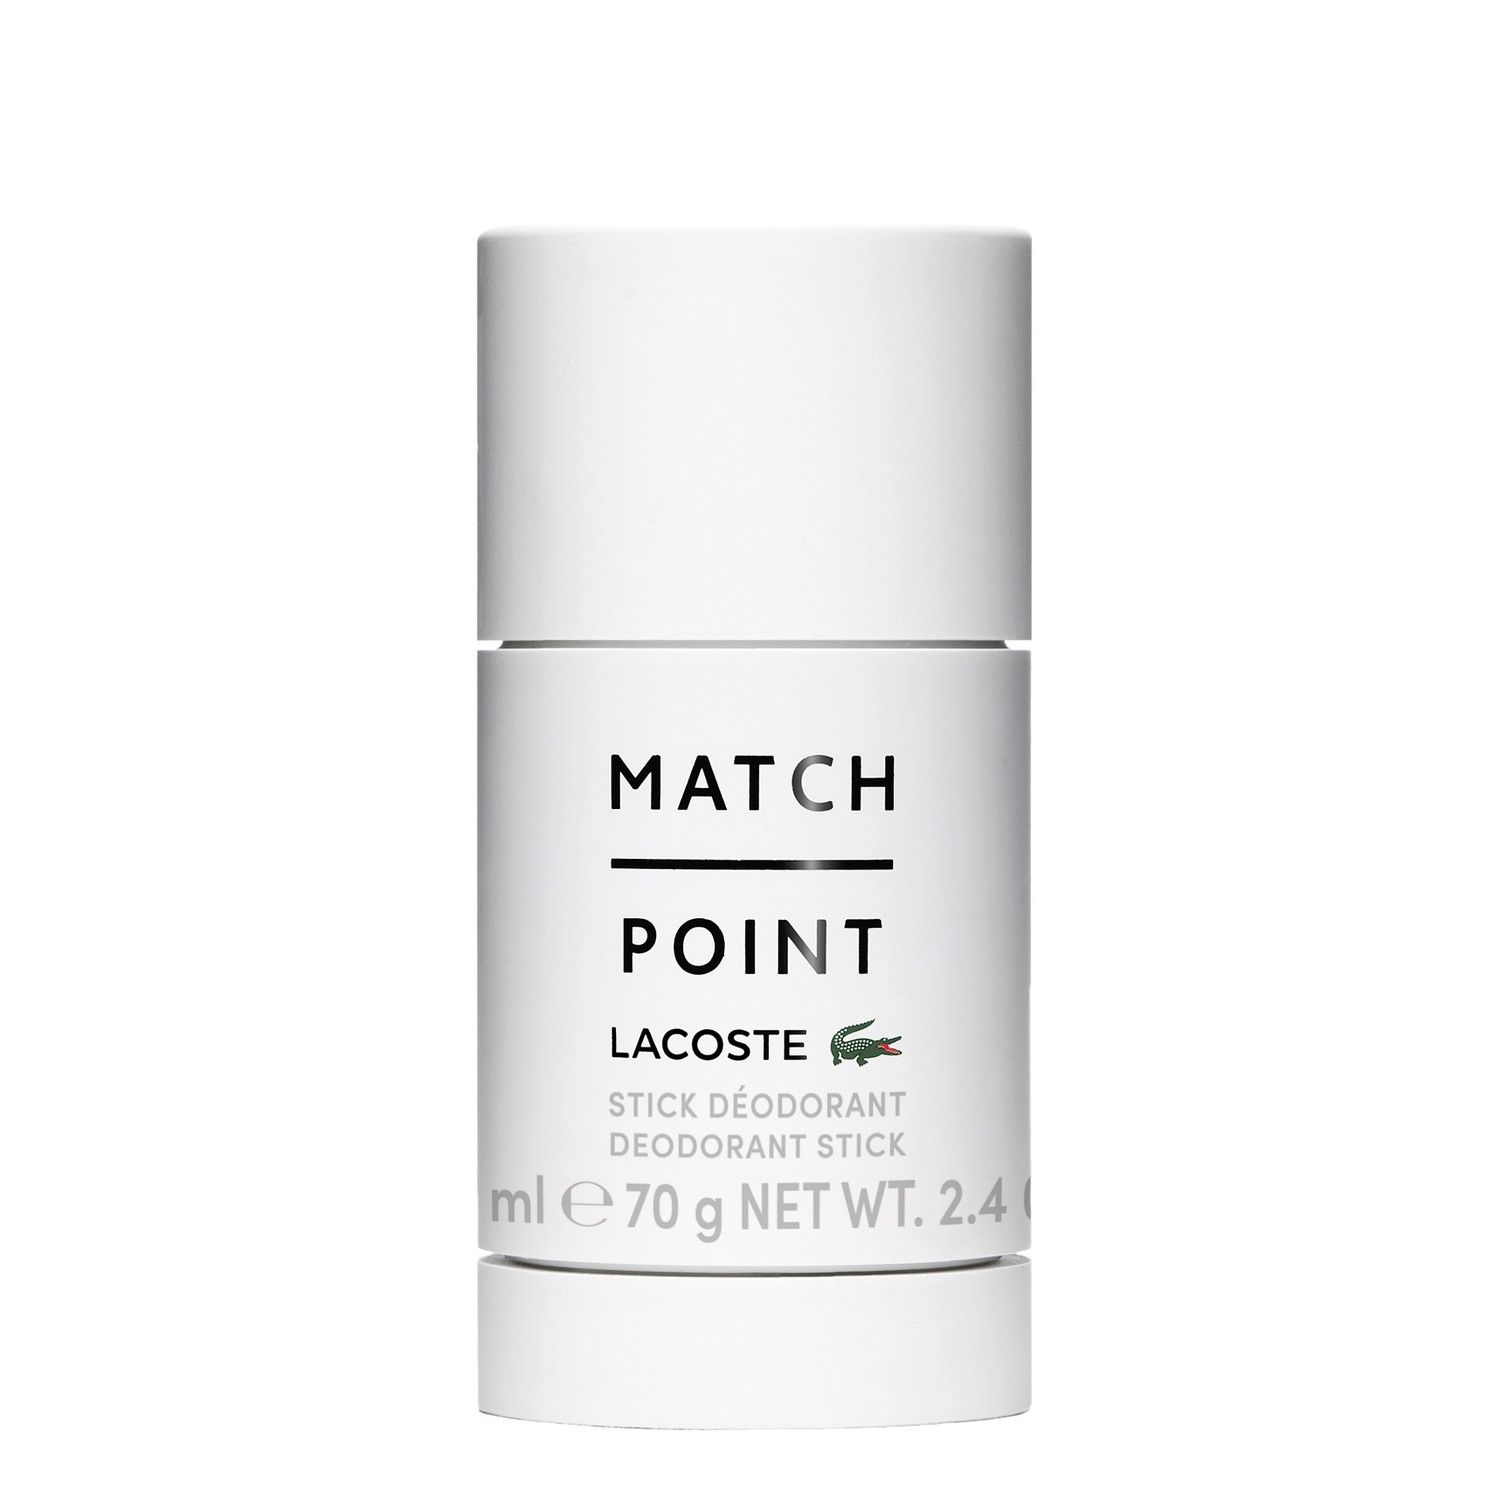 Lacoste Matchpoint Deodorant Stick 70g